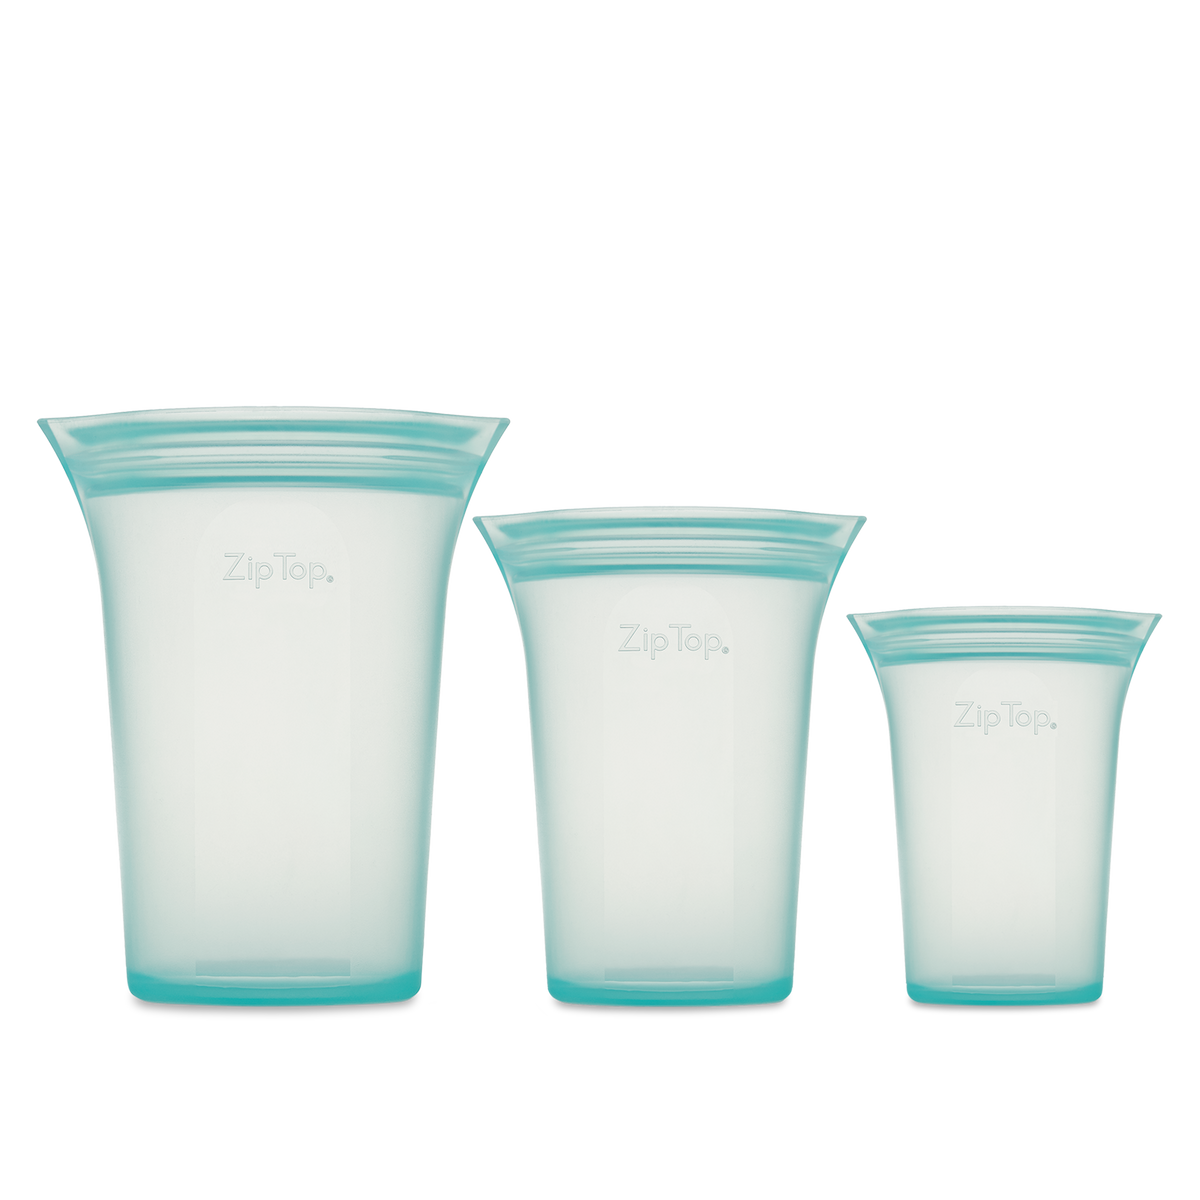 Zip Top Reusable Silicone 3-Piece Cup Set - Small 8 oz., Medium 16 oz.,  Large 24 oz. Zippered Storage Containers in Peach Z-CUP3A-07 - The Home  Depot